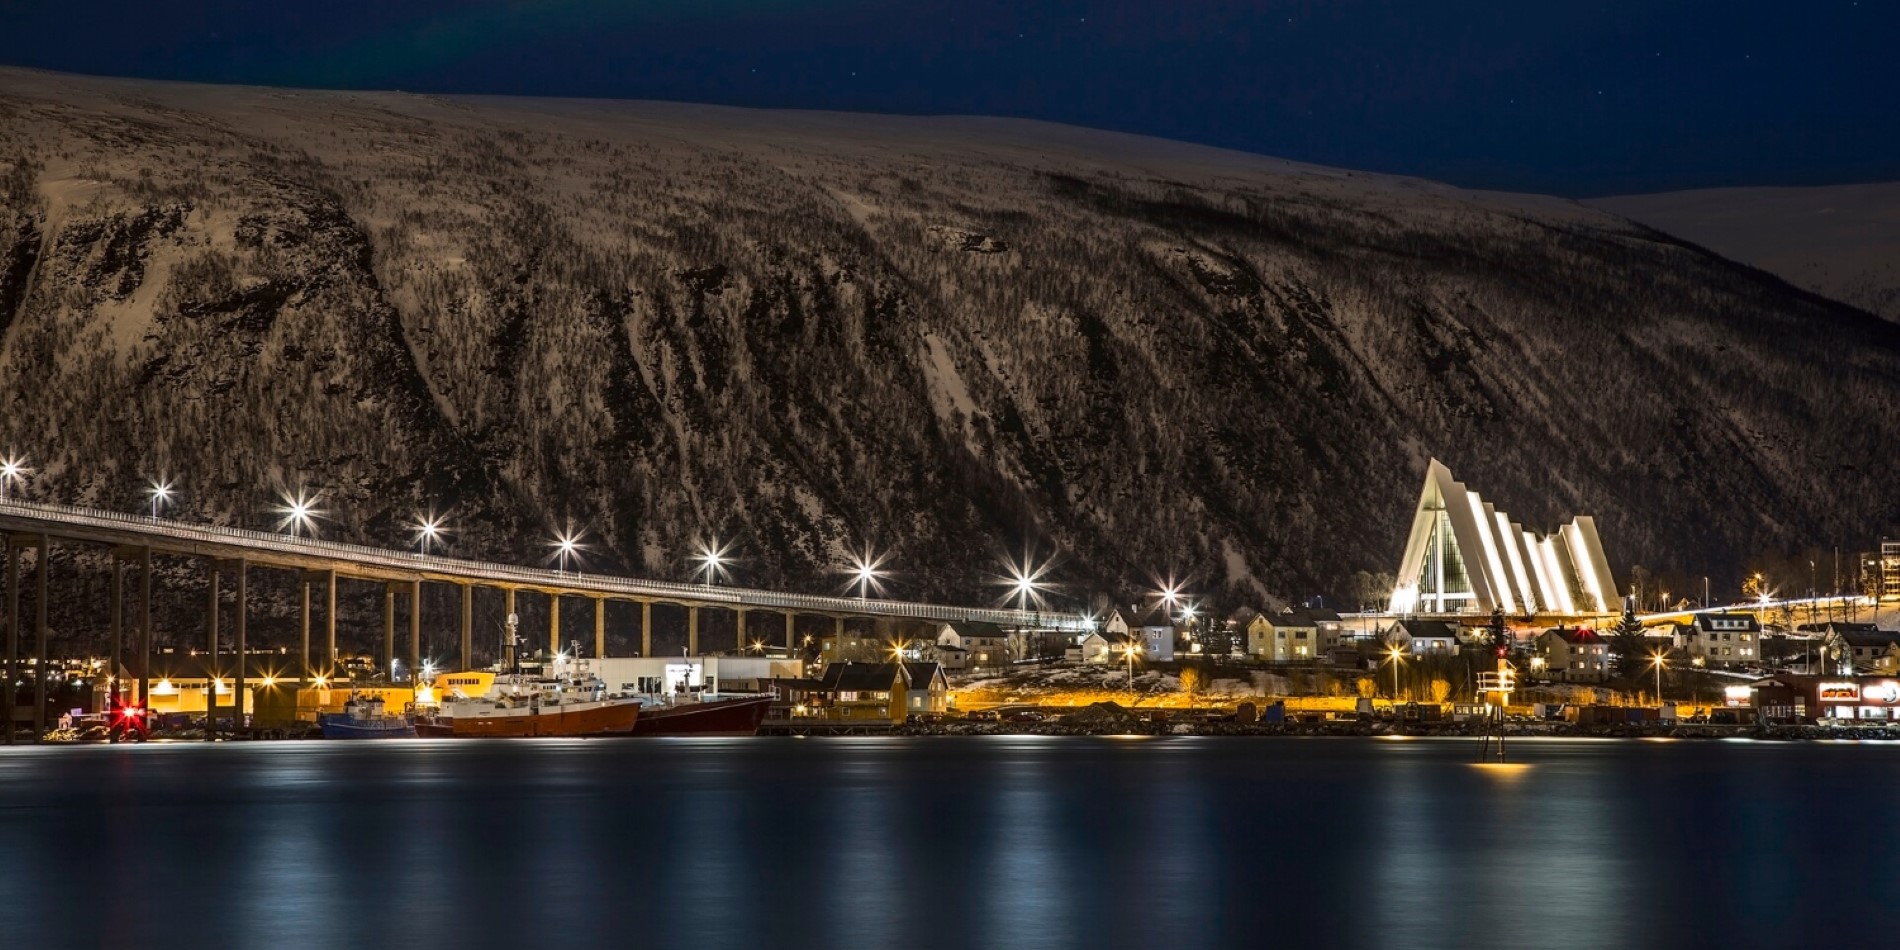 The Arctic Cathedral seen from Tromsøya, Norway. The bridge and cathedral light up the dark night.